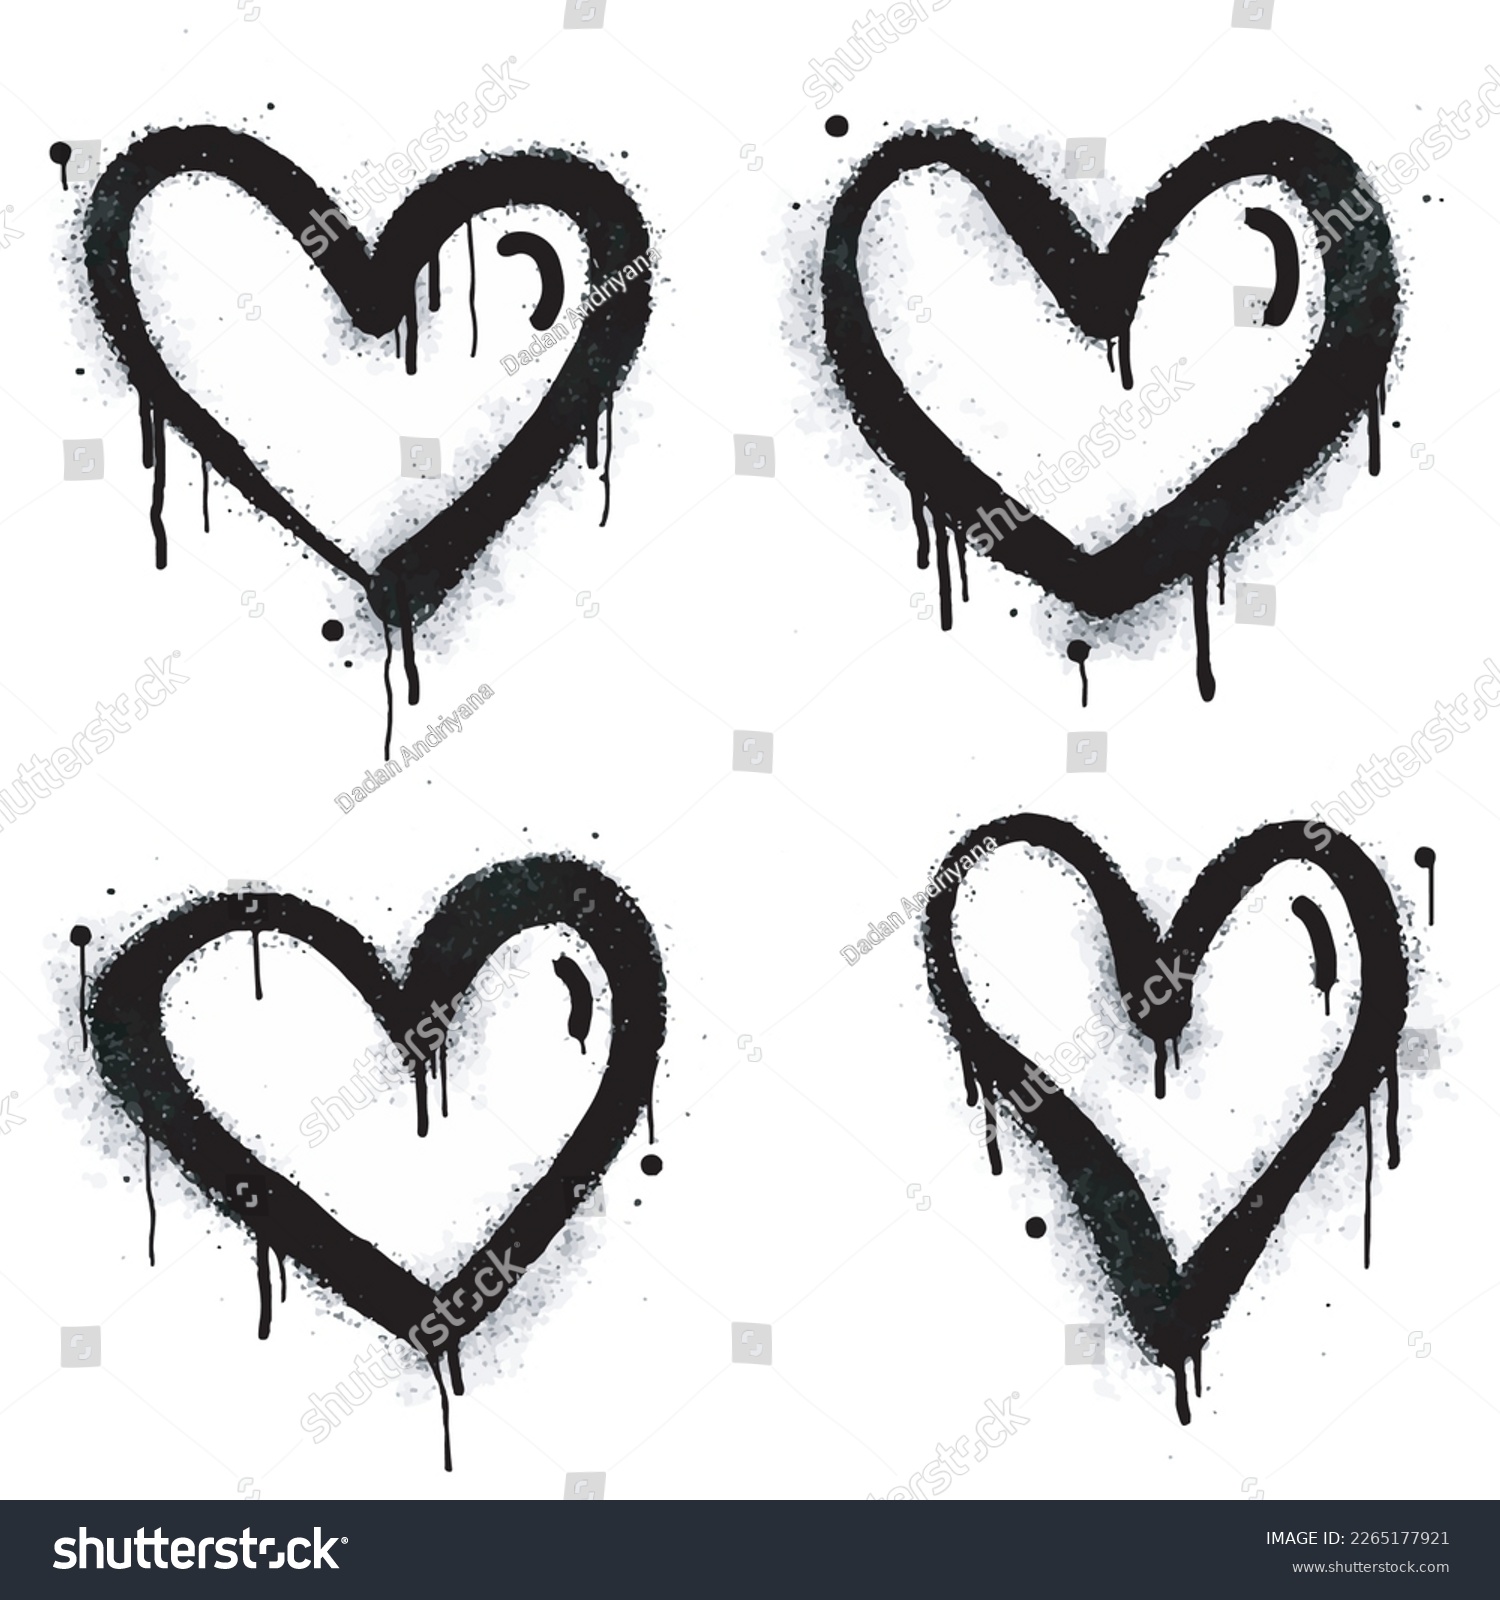 SVG of Set of graffiti hearts Signs Spray painted in black on white. Love heart drop symbol. isolated on white background. vector illustration svg